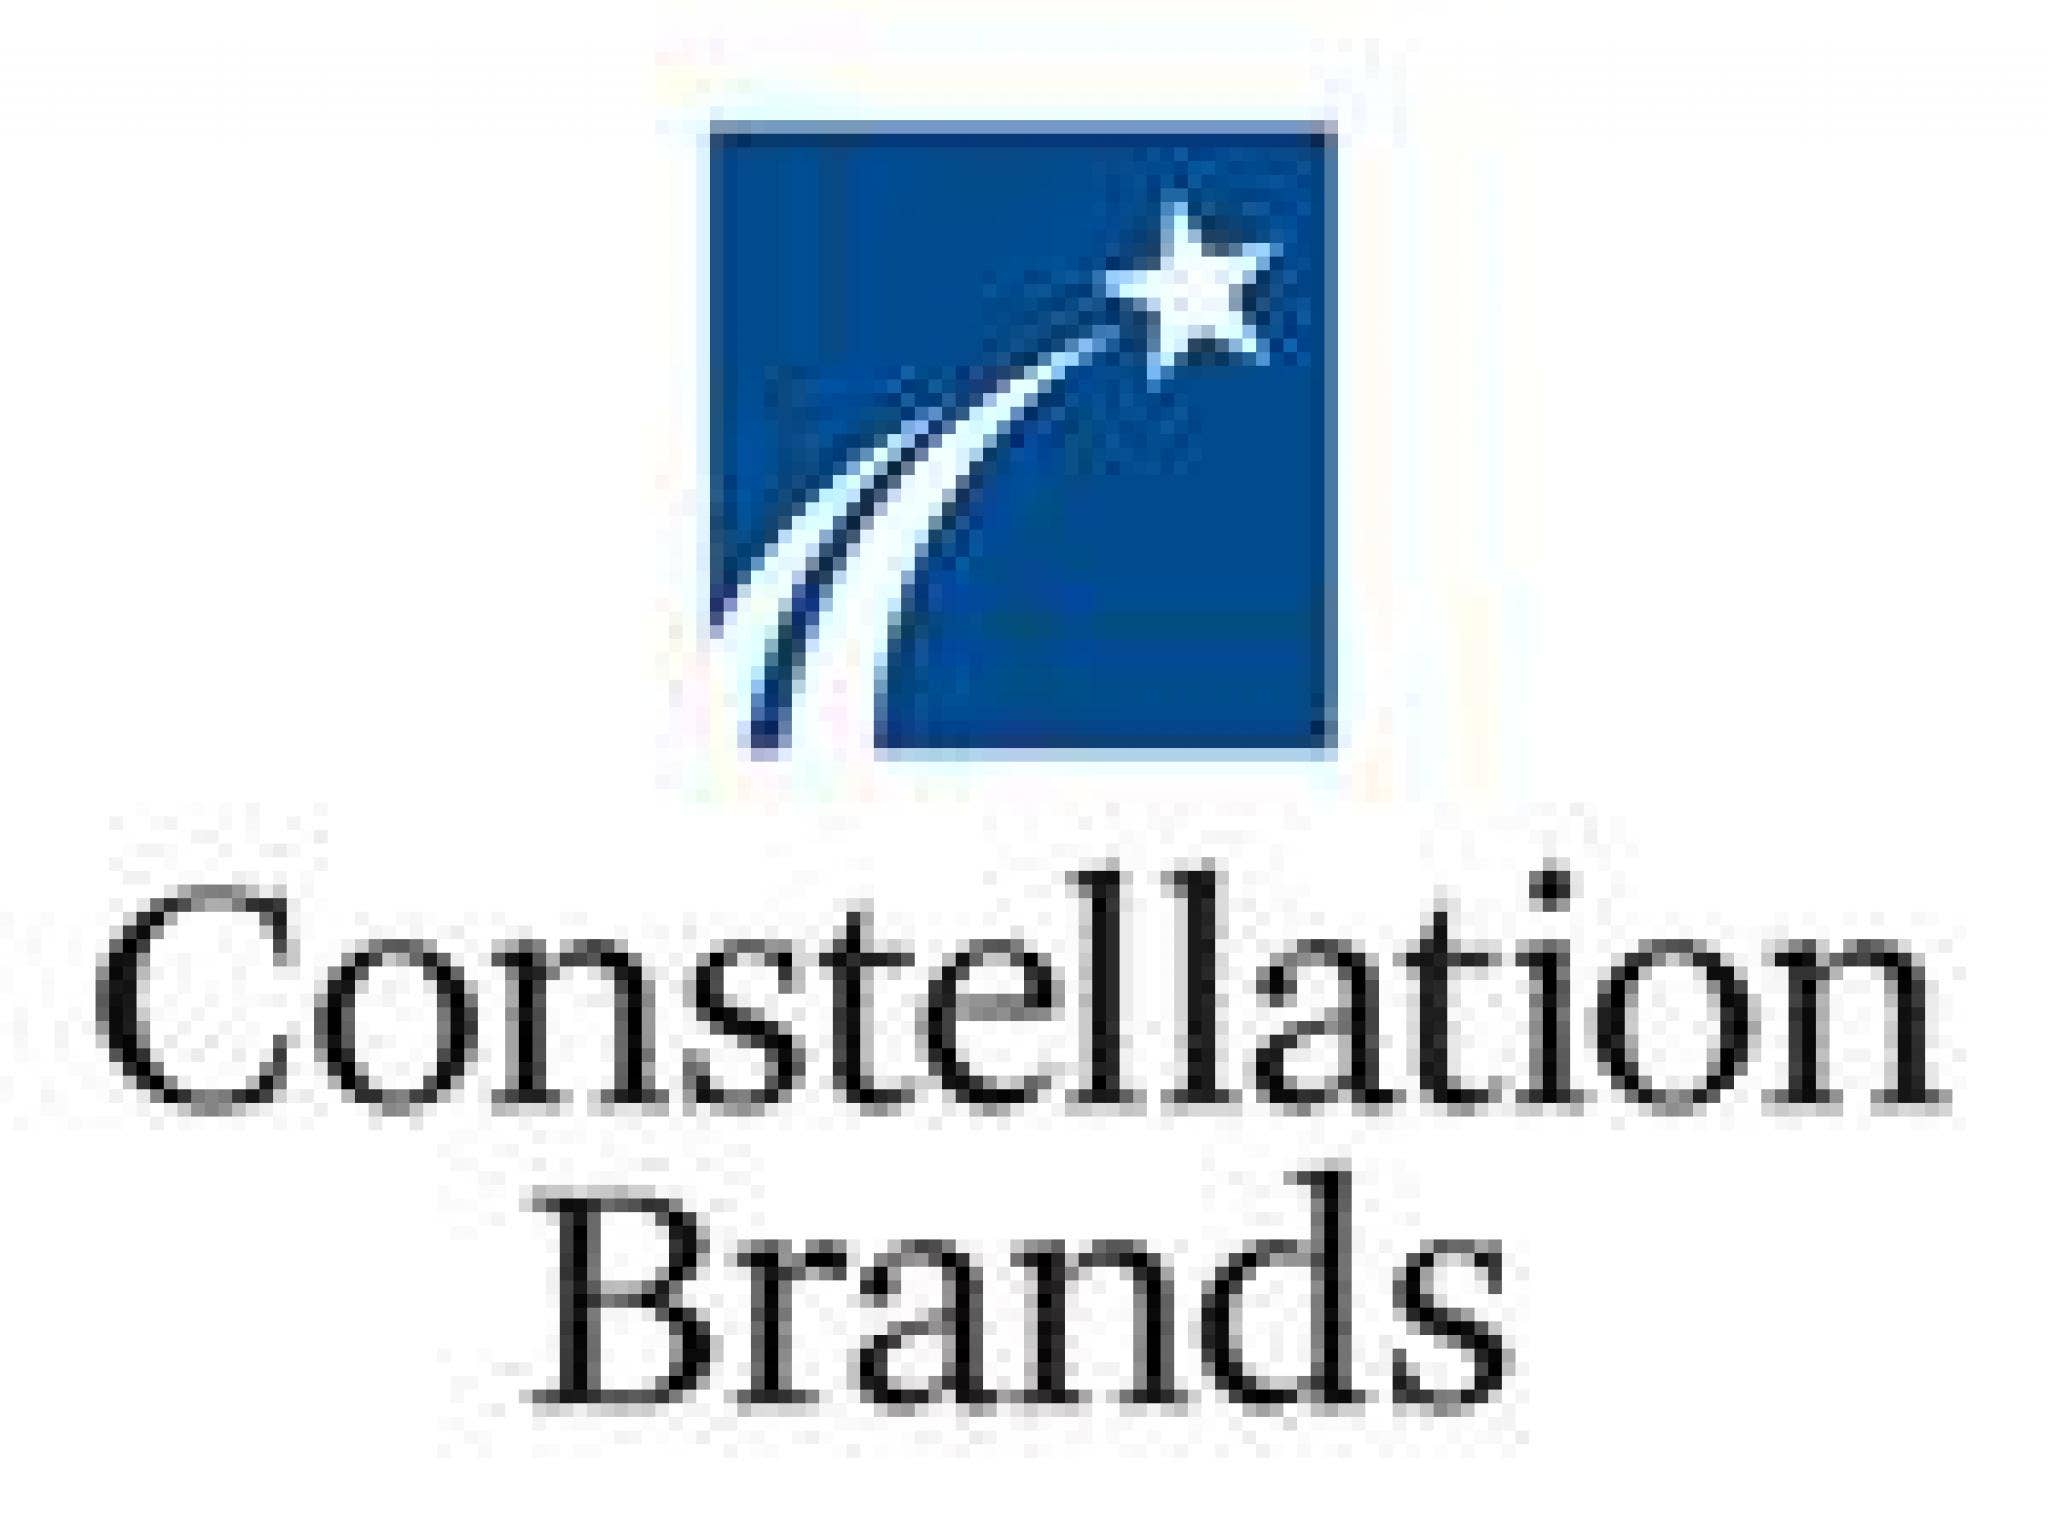 Constellation Brands Q1 Earnings Top Estimates; Plans To Eliminate Class B Common Stock